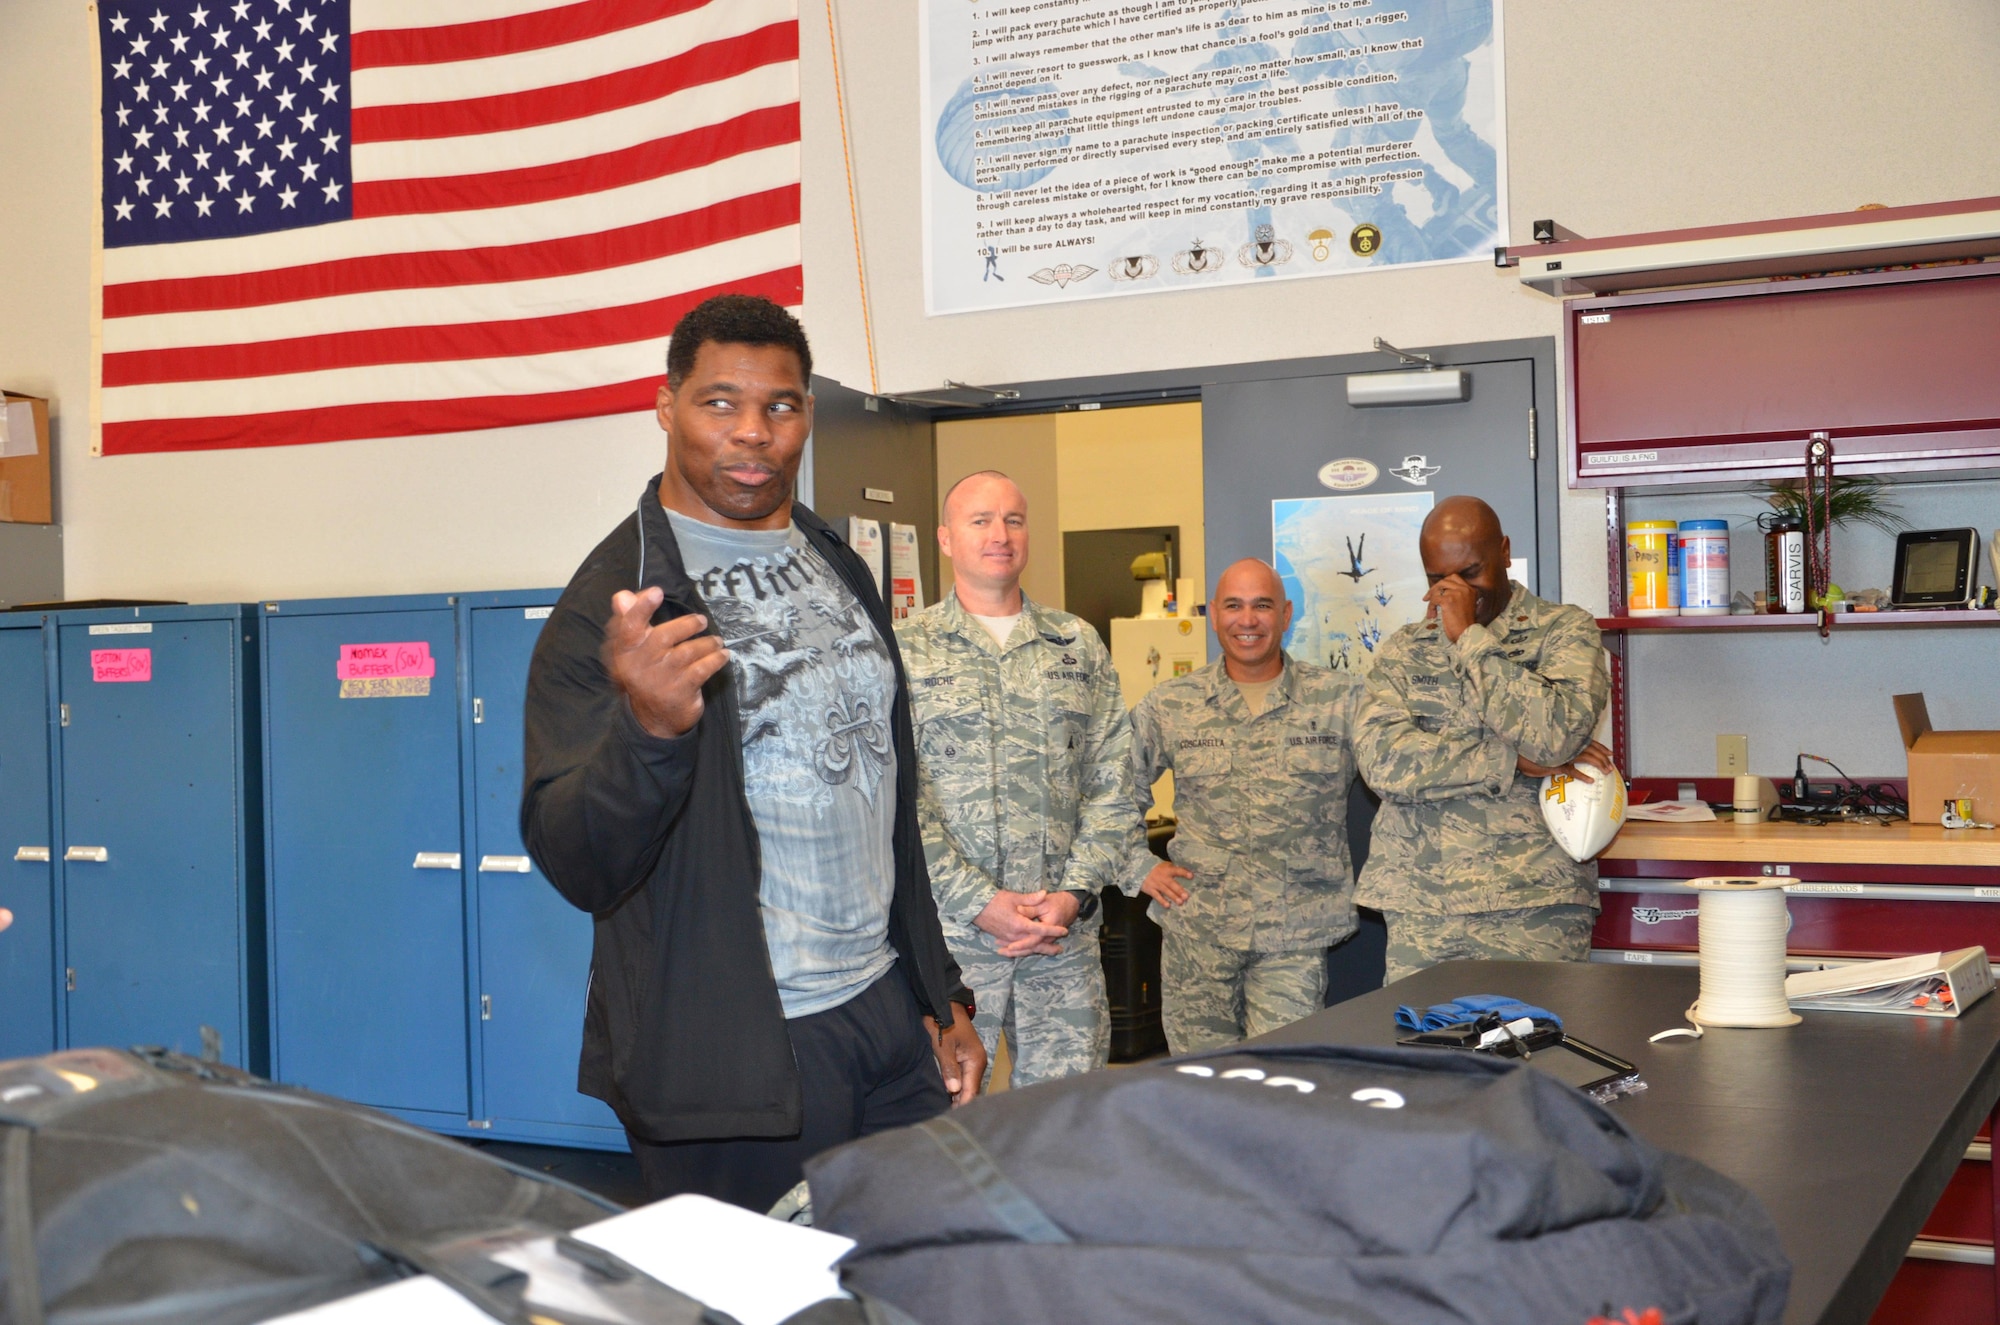 NFL football hero Herschel Walker visited Patrick Air Force Base, January 24, taking  time to meet with Guardian Angel Airmen from the 920th Rescue Wing. These elite warrior Airmen undergo intense physical and mental training to rescue isolated personnel in combat. They toured Walker through their squadron and demonstrated some of their rescue skills. Throughout the visit, Walker held their rapt attention sharing lots of inspirational accounts of his days playing football. Later that afternoon, Walker stood in front of several hundred Patrick AFB employees who came to listen to his personal battled with mental illness. (U.S. Air Force photo/Maj. Cathleen Snow)
